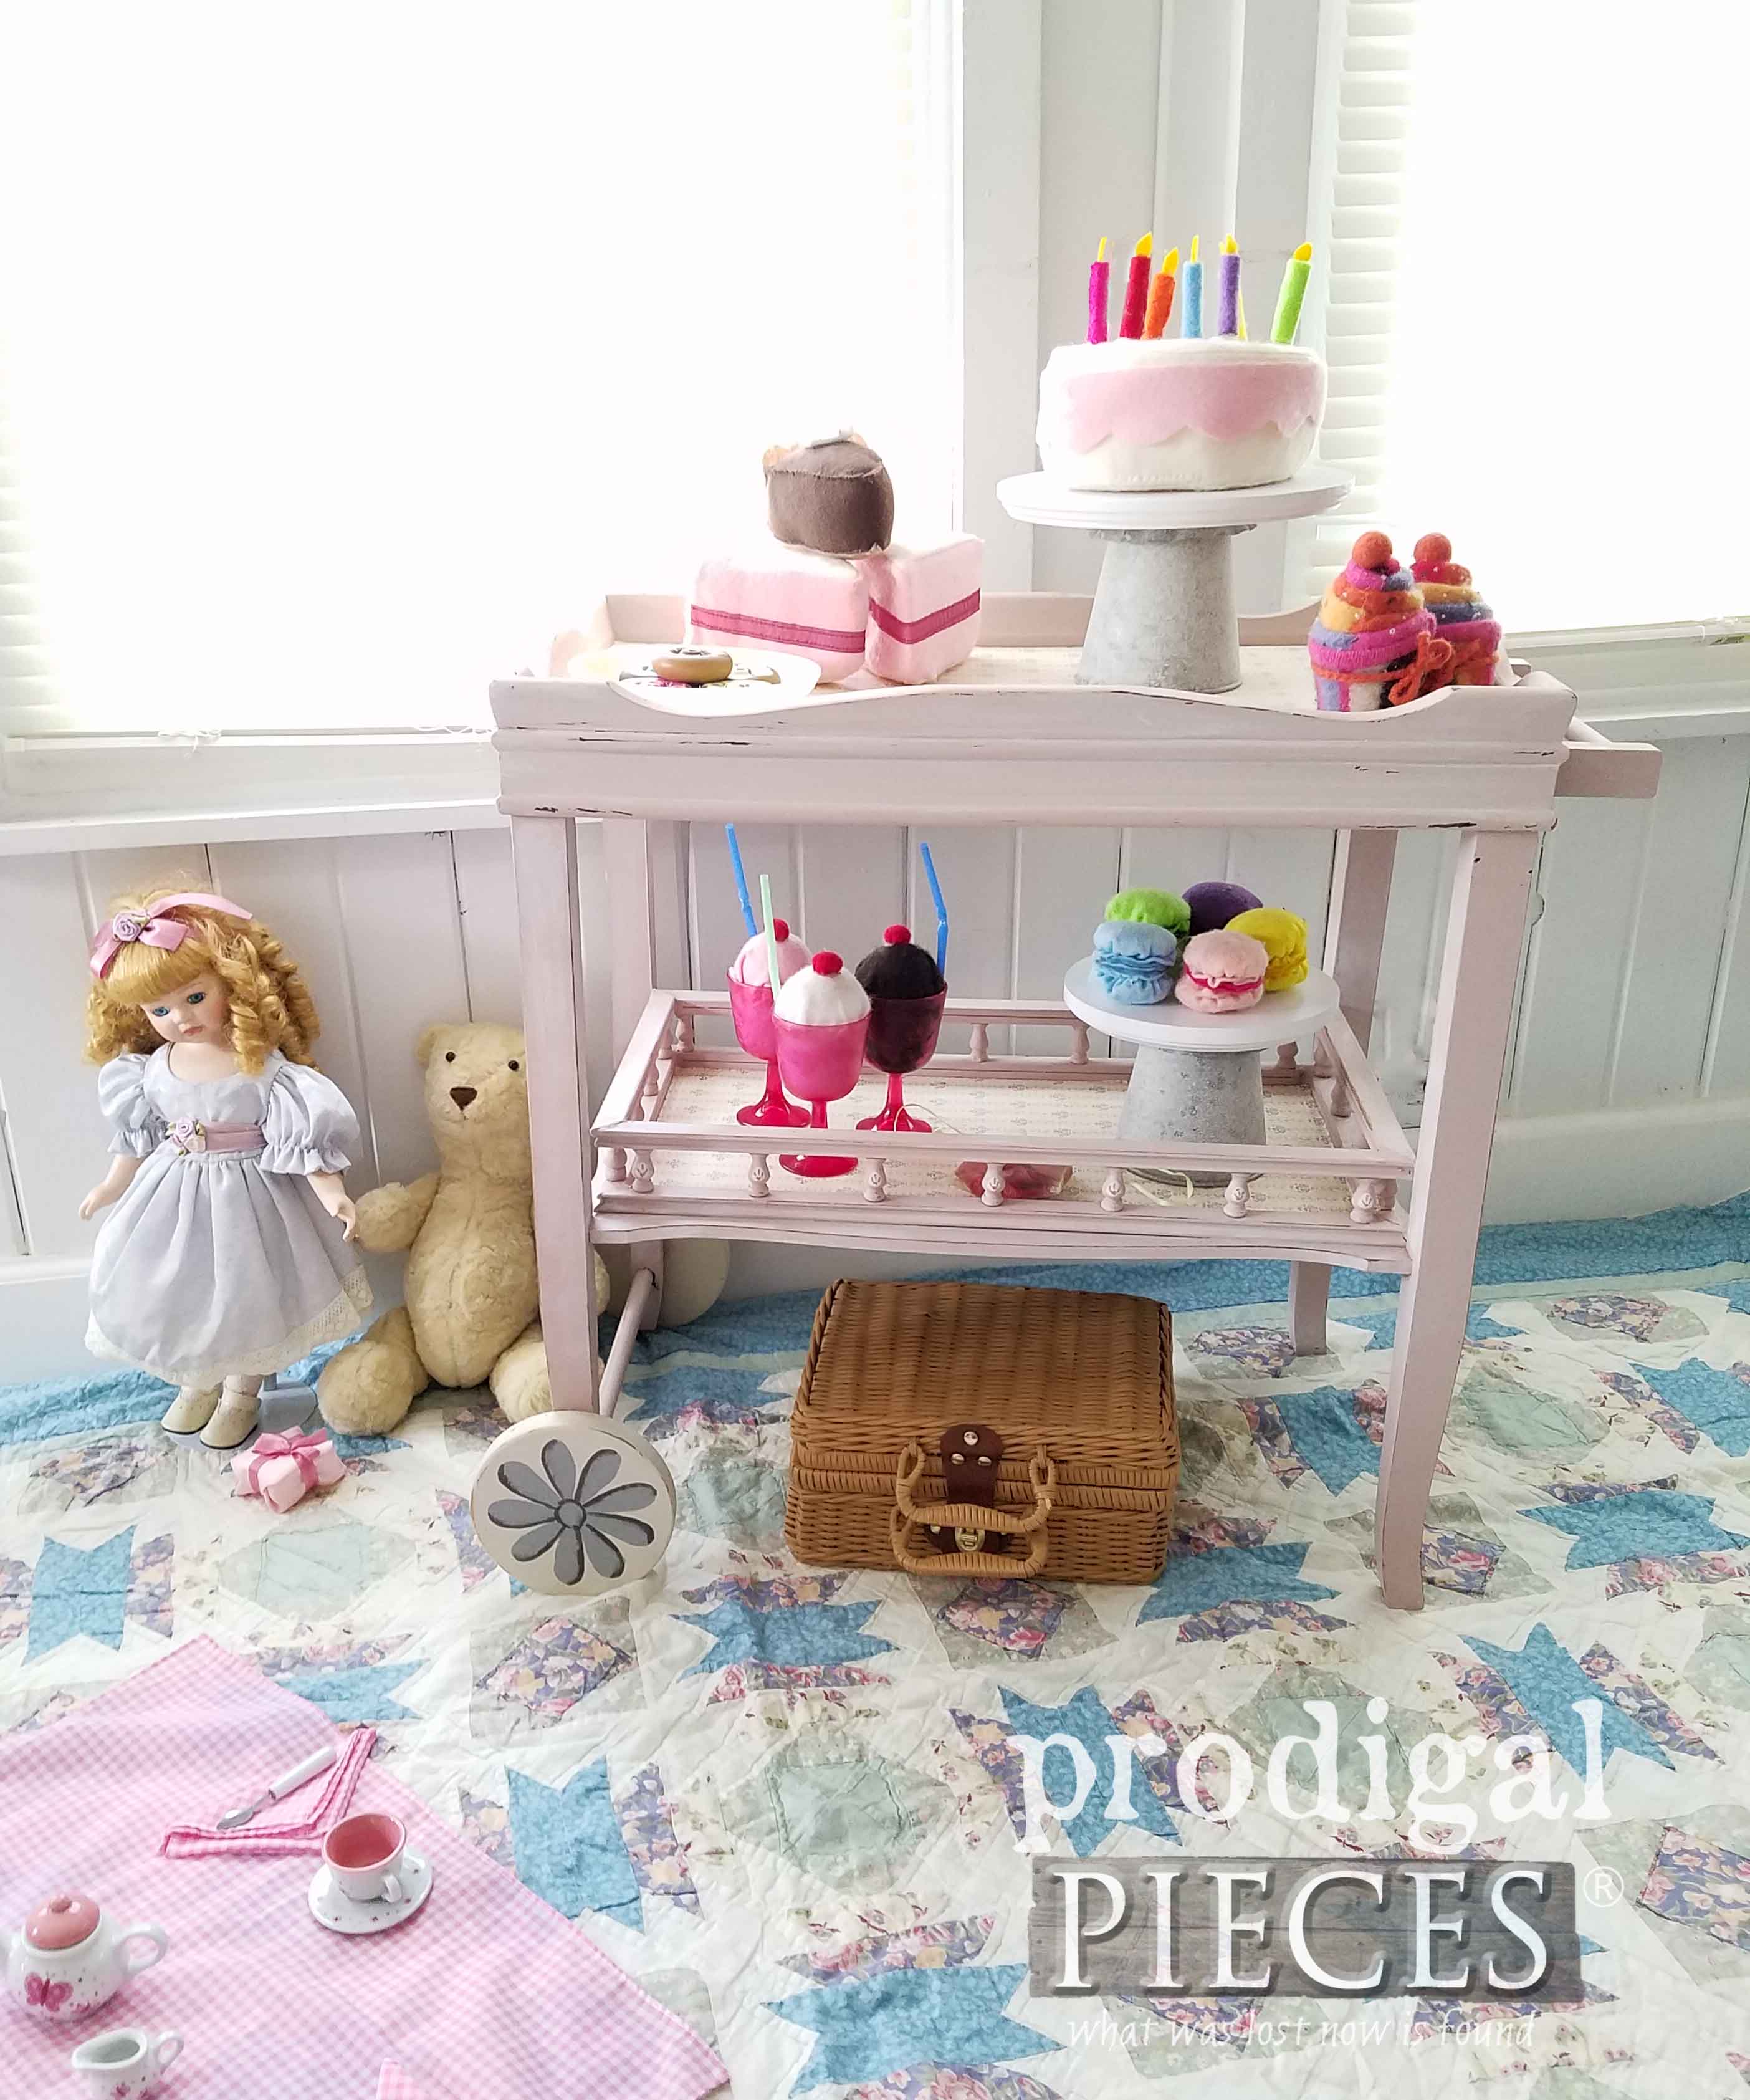 Repurposed Side Table into Child's Tea Cart by Larissa of Prodigal Pieces | prodigalpieces.com